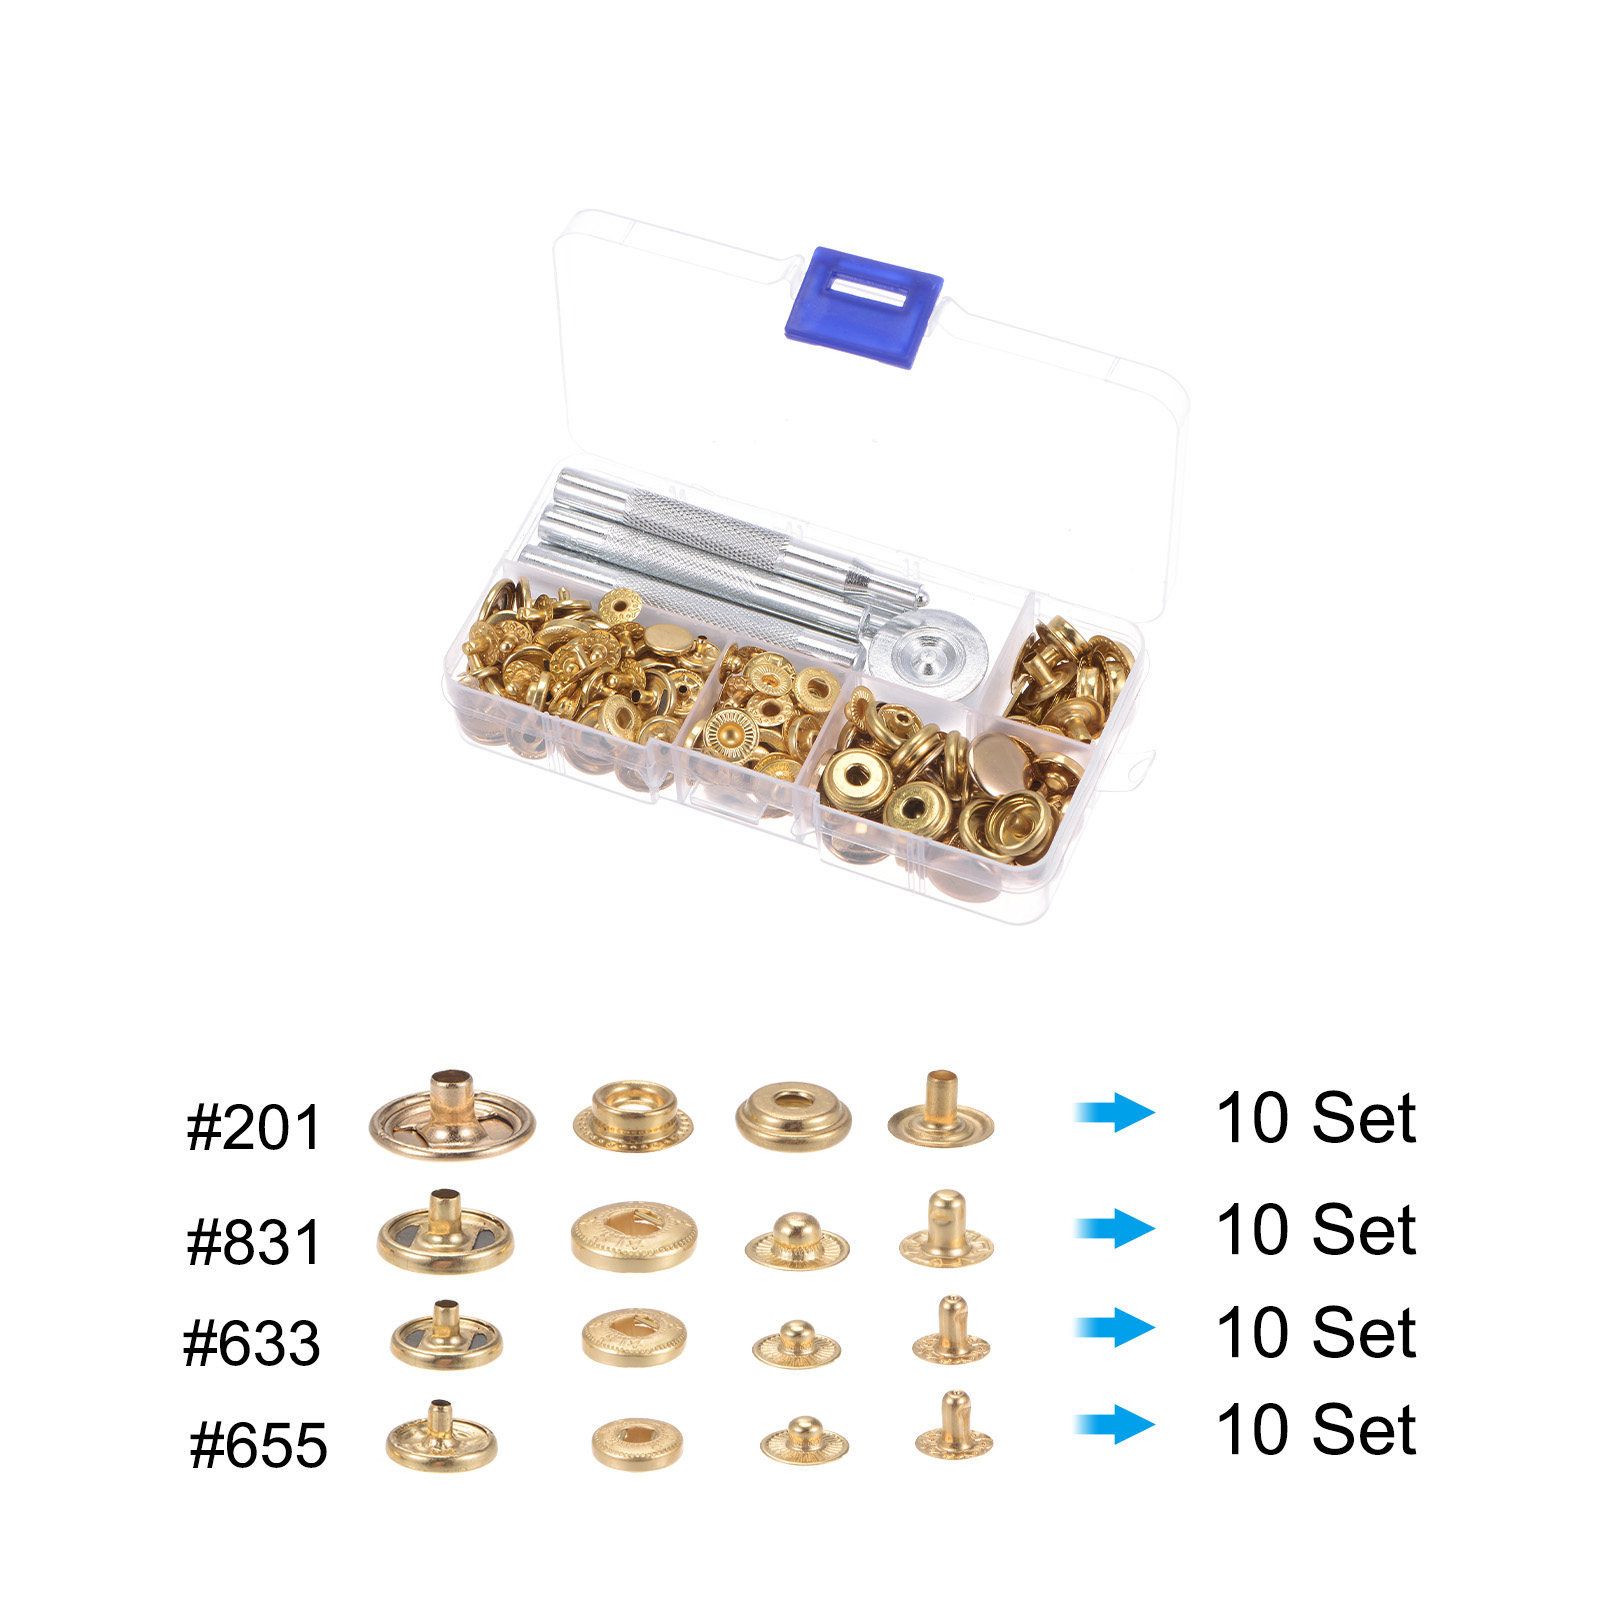 Unique Bargains 40 Sets Snap Fasteners Kit 4 Type Copper with 9 Setter Tools & Box, Golden